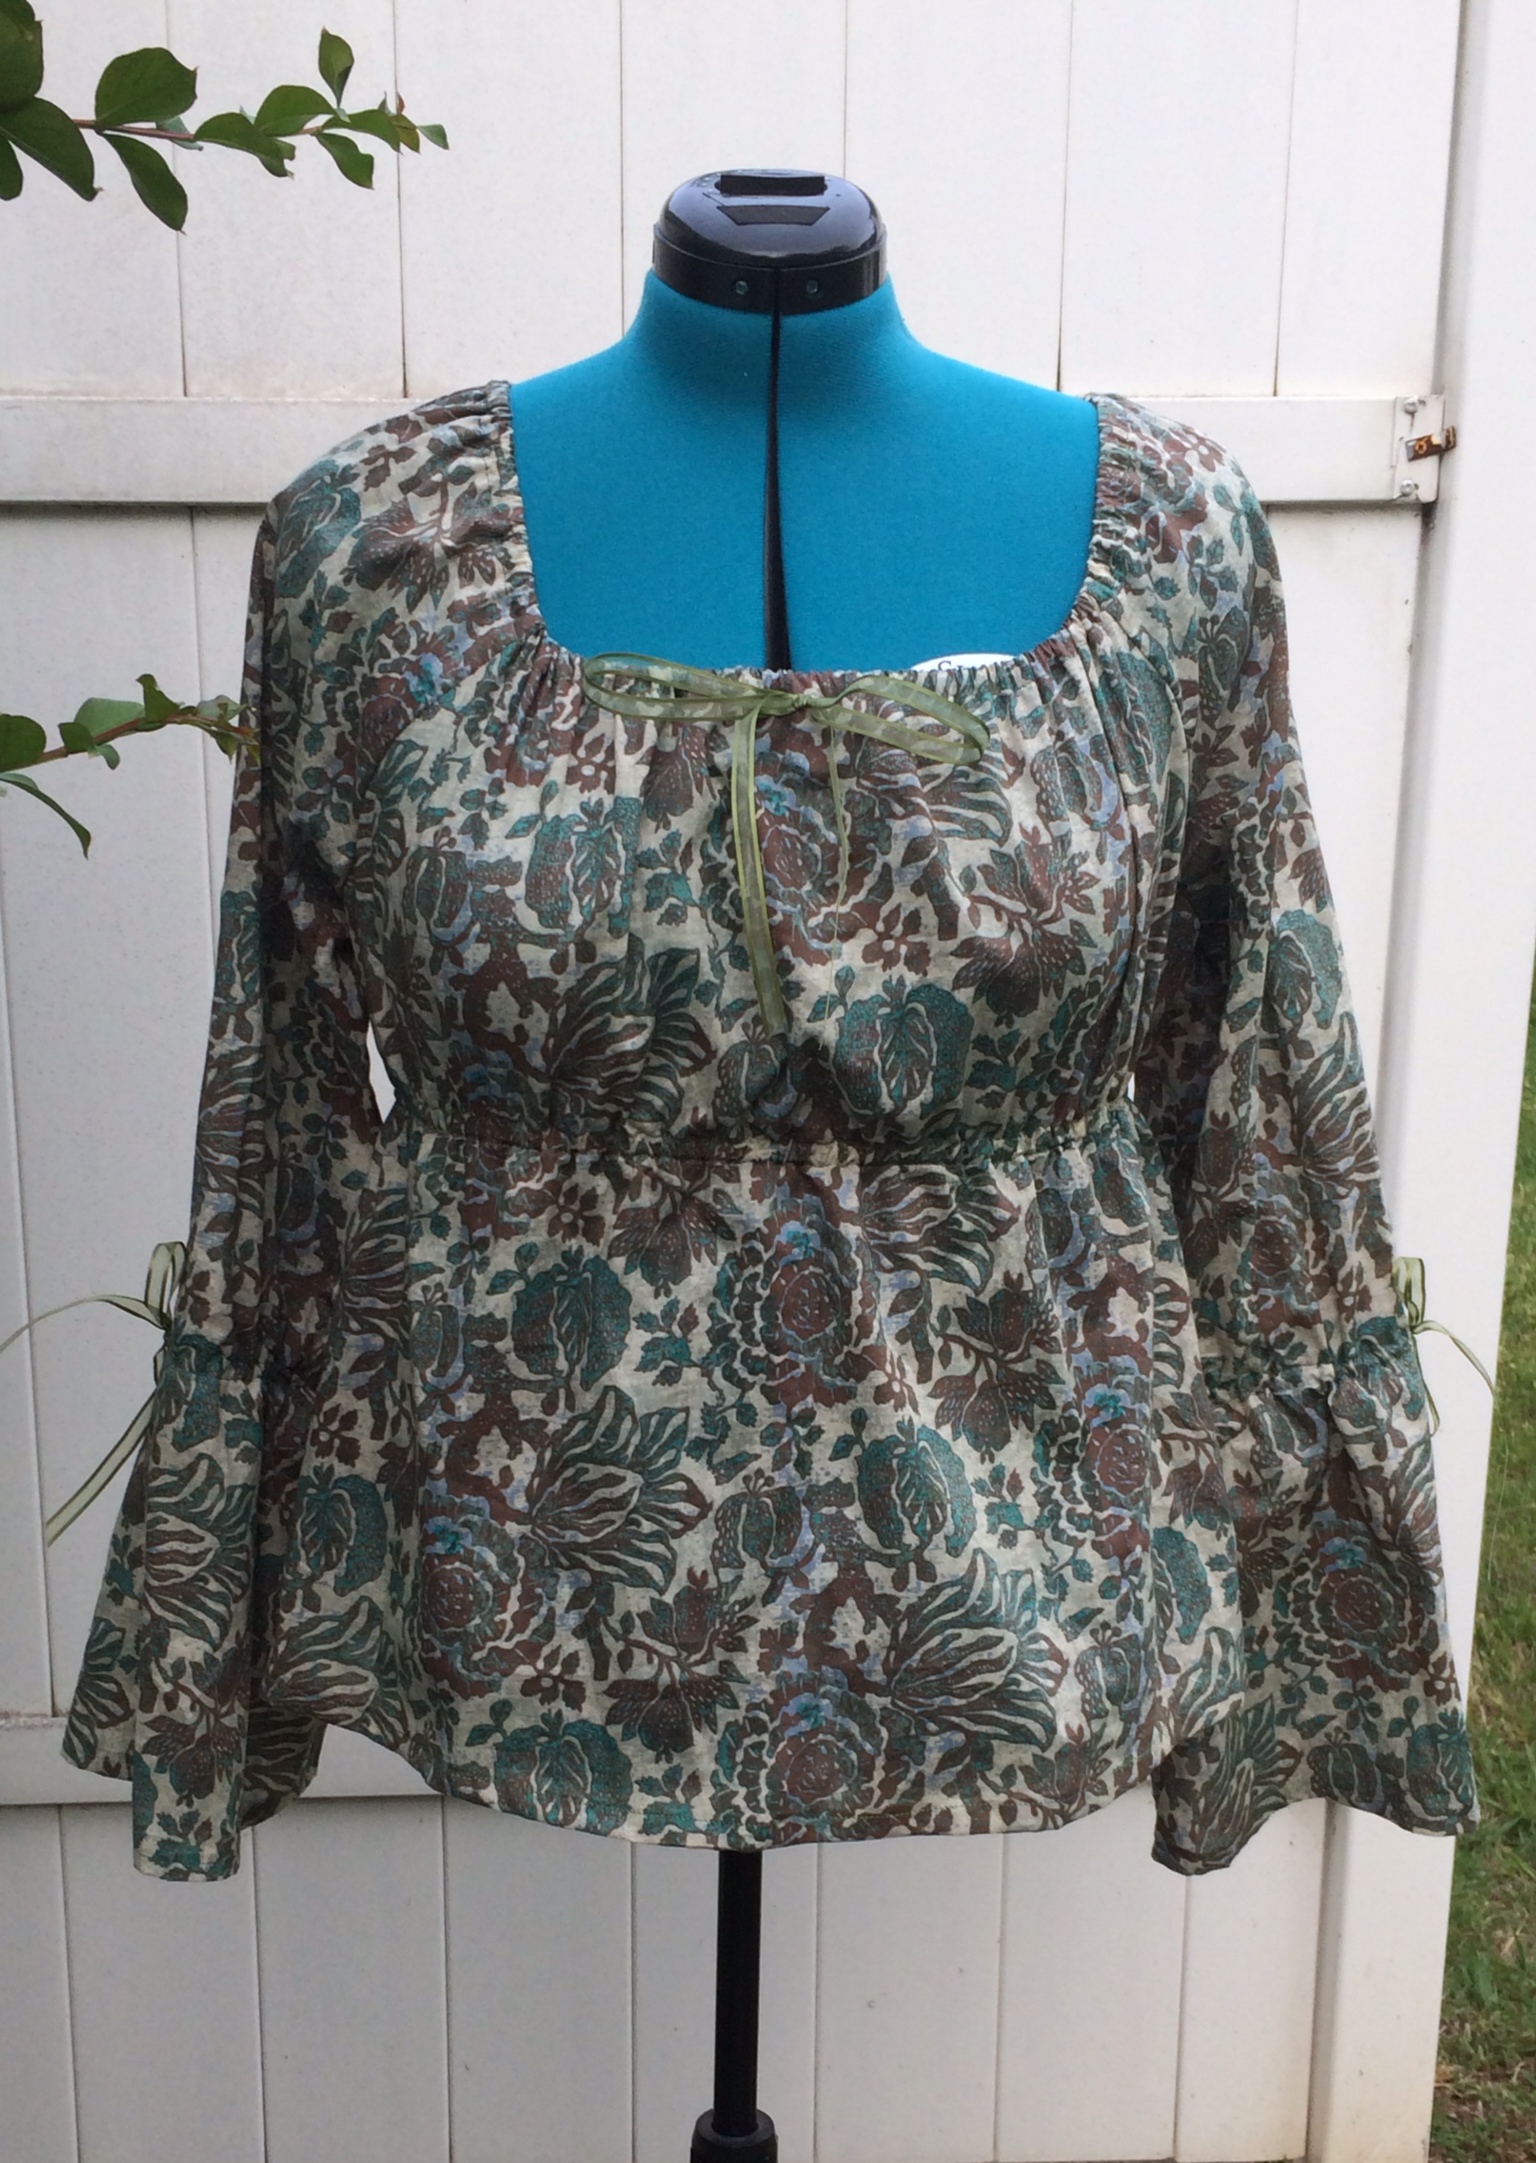 Cotton Voile Peasant Blouse – Sewing Projects | BurdaStyle.com